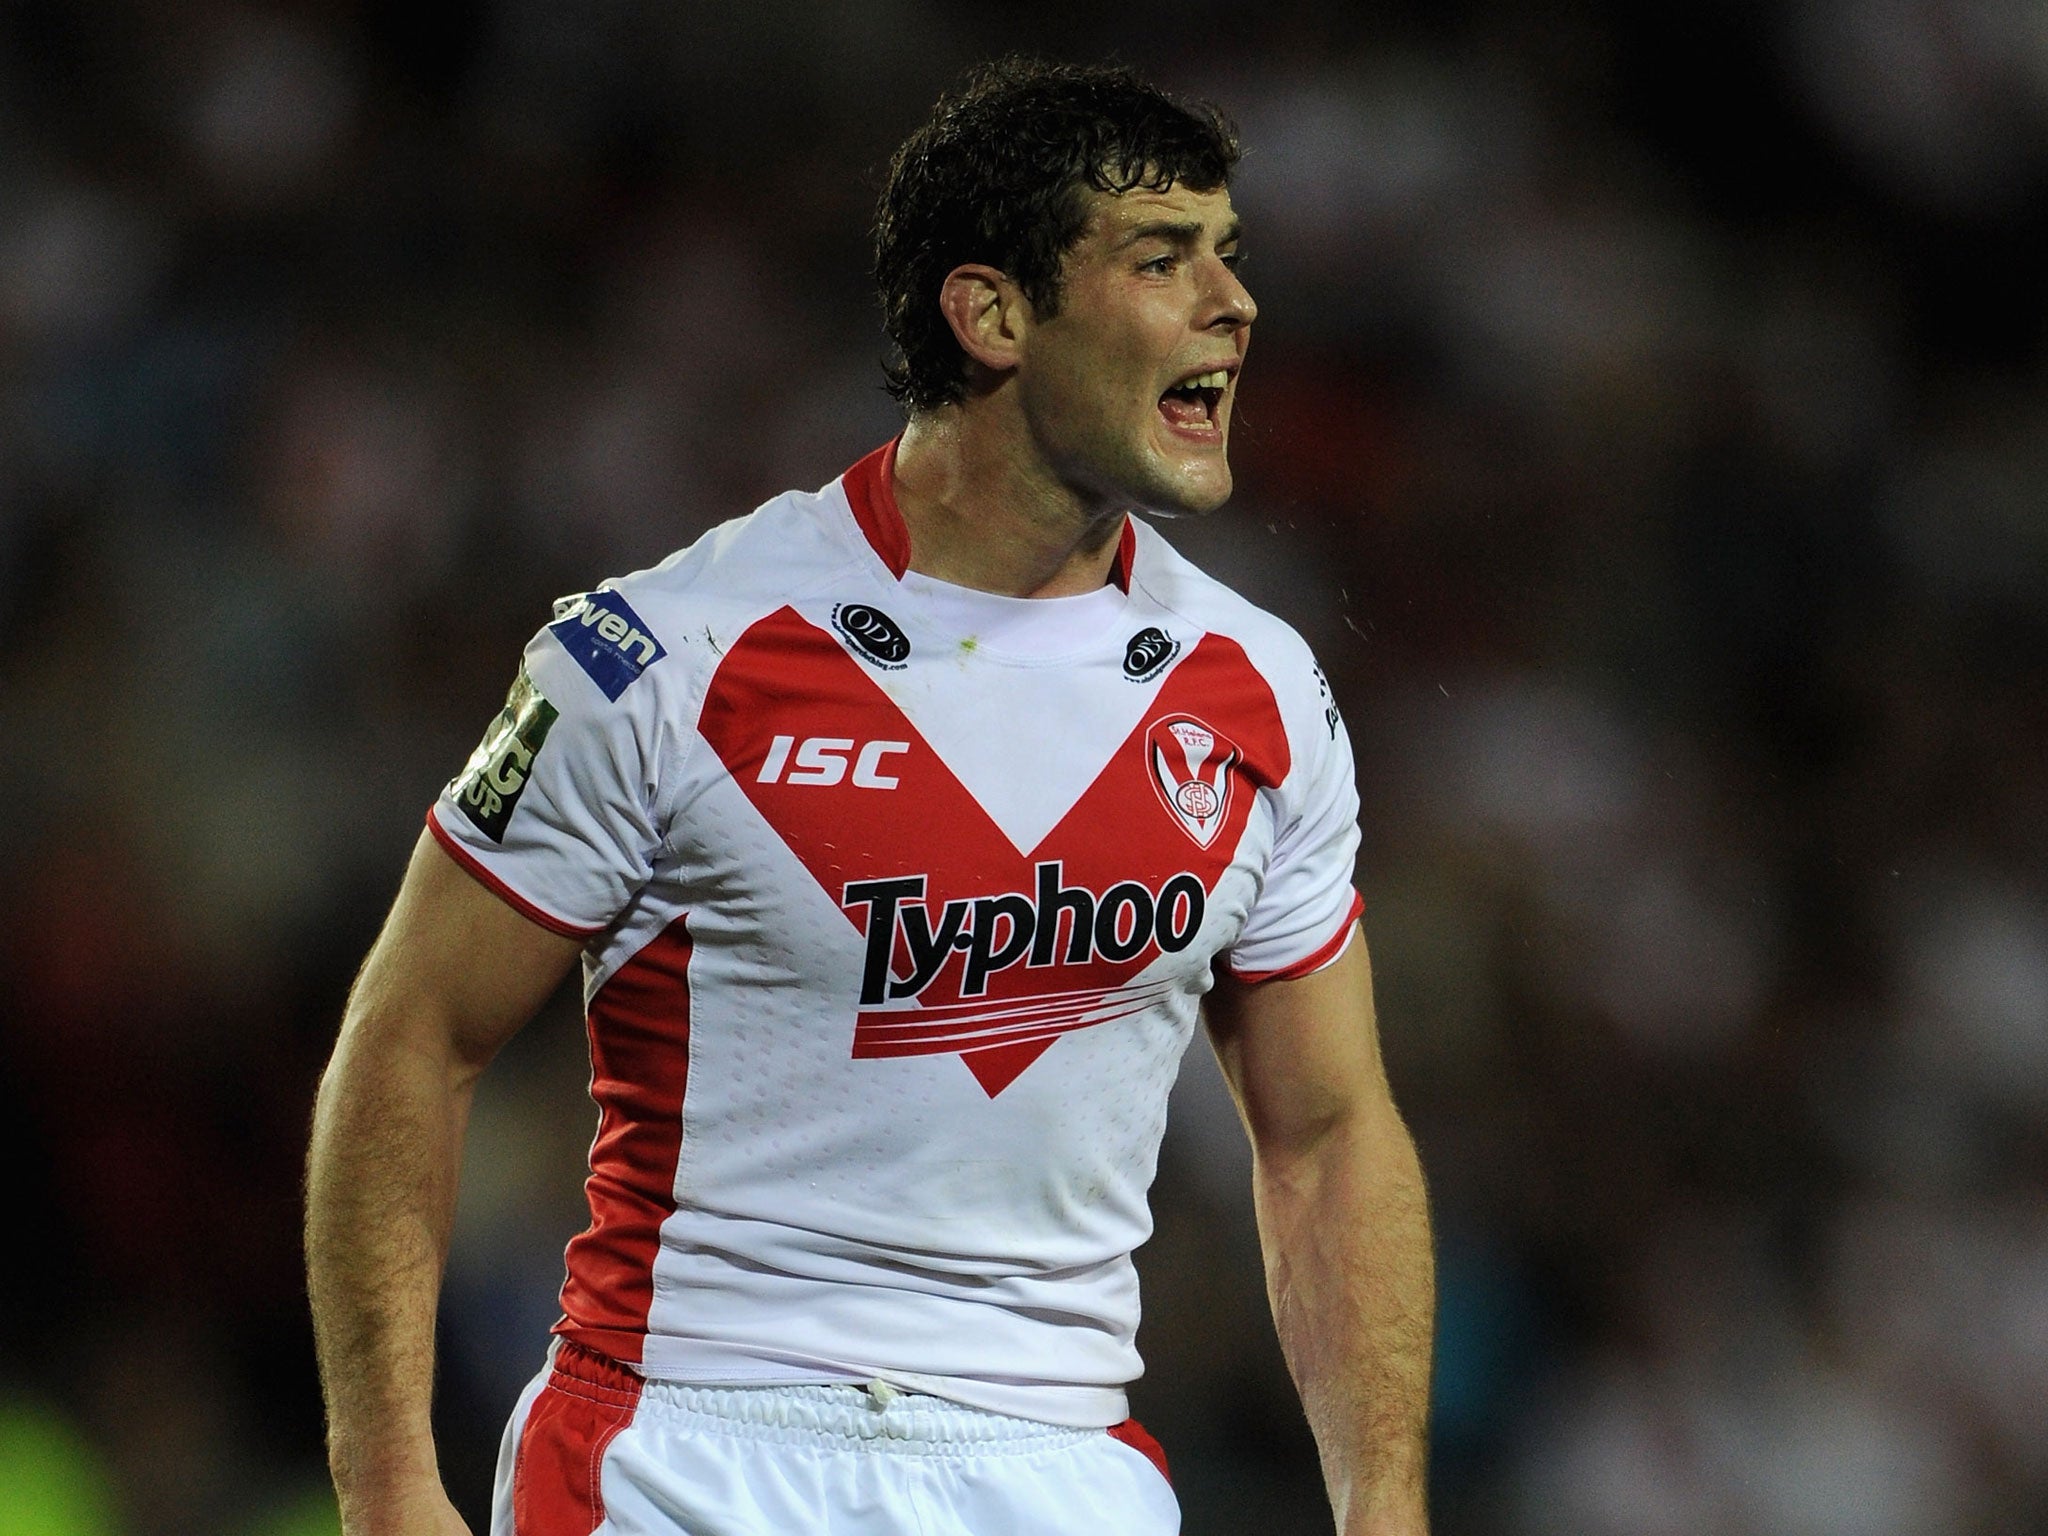 St Helens captain Paul Wellens is determined to fight for his place despite losing his full-back position to Jonny Lomax